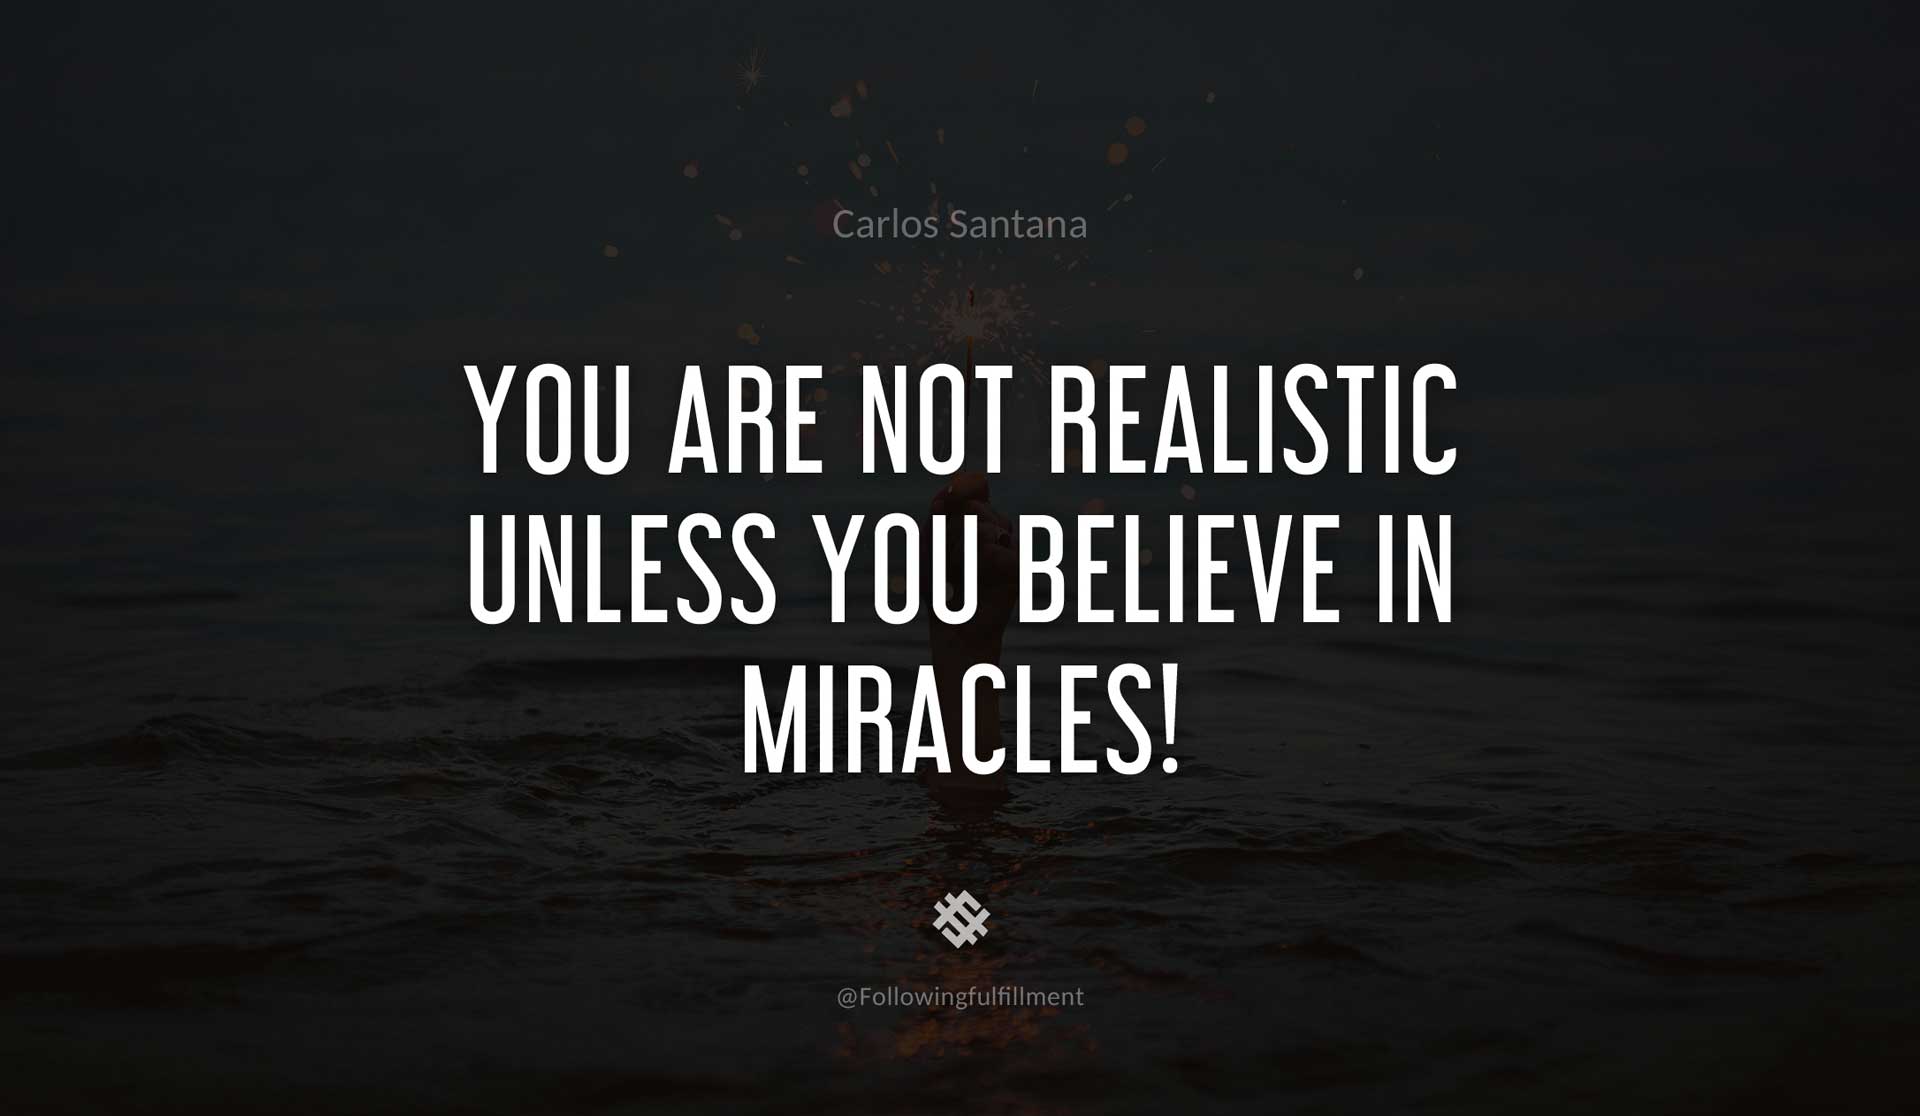 You-are-not-realistic-unless-you-believe-in-miracles!-CARLOS-SANTANA-Quote.jpg